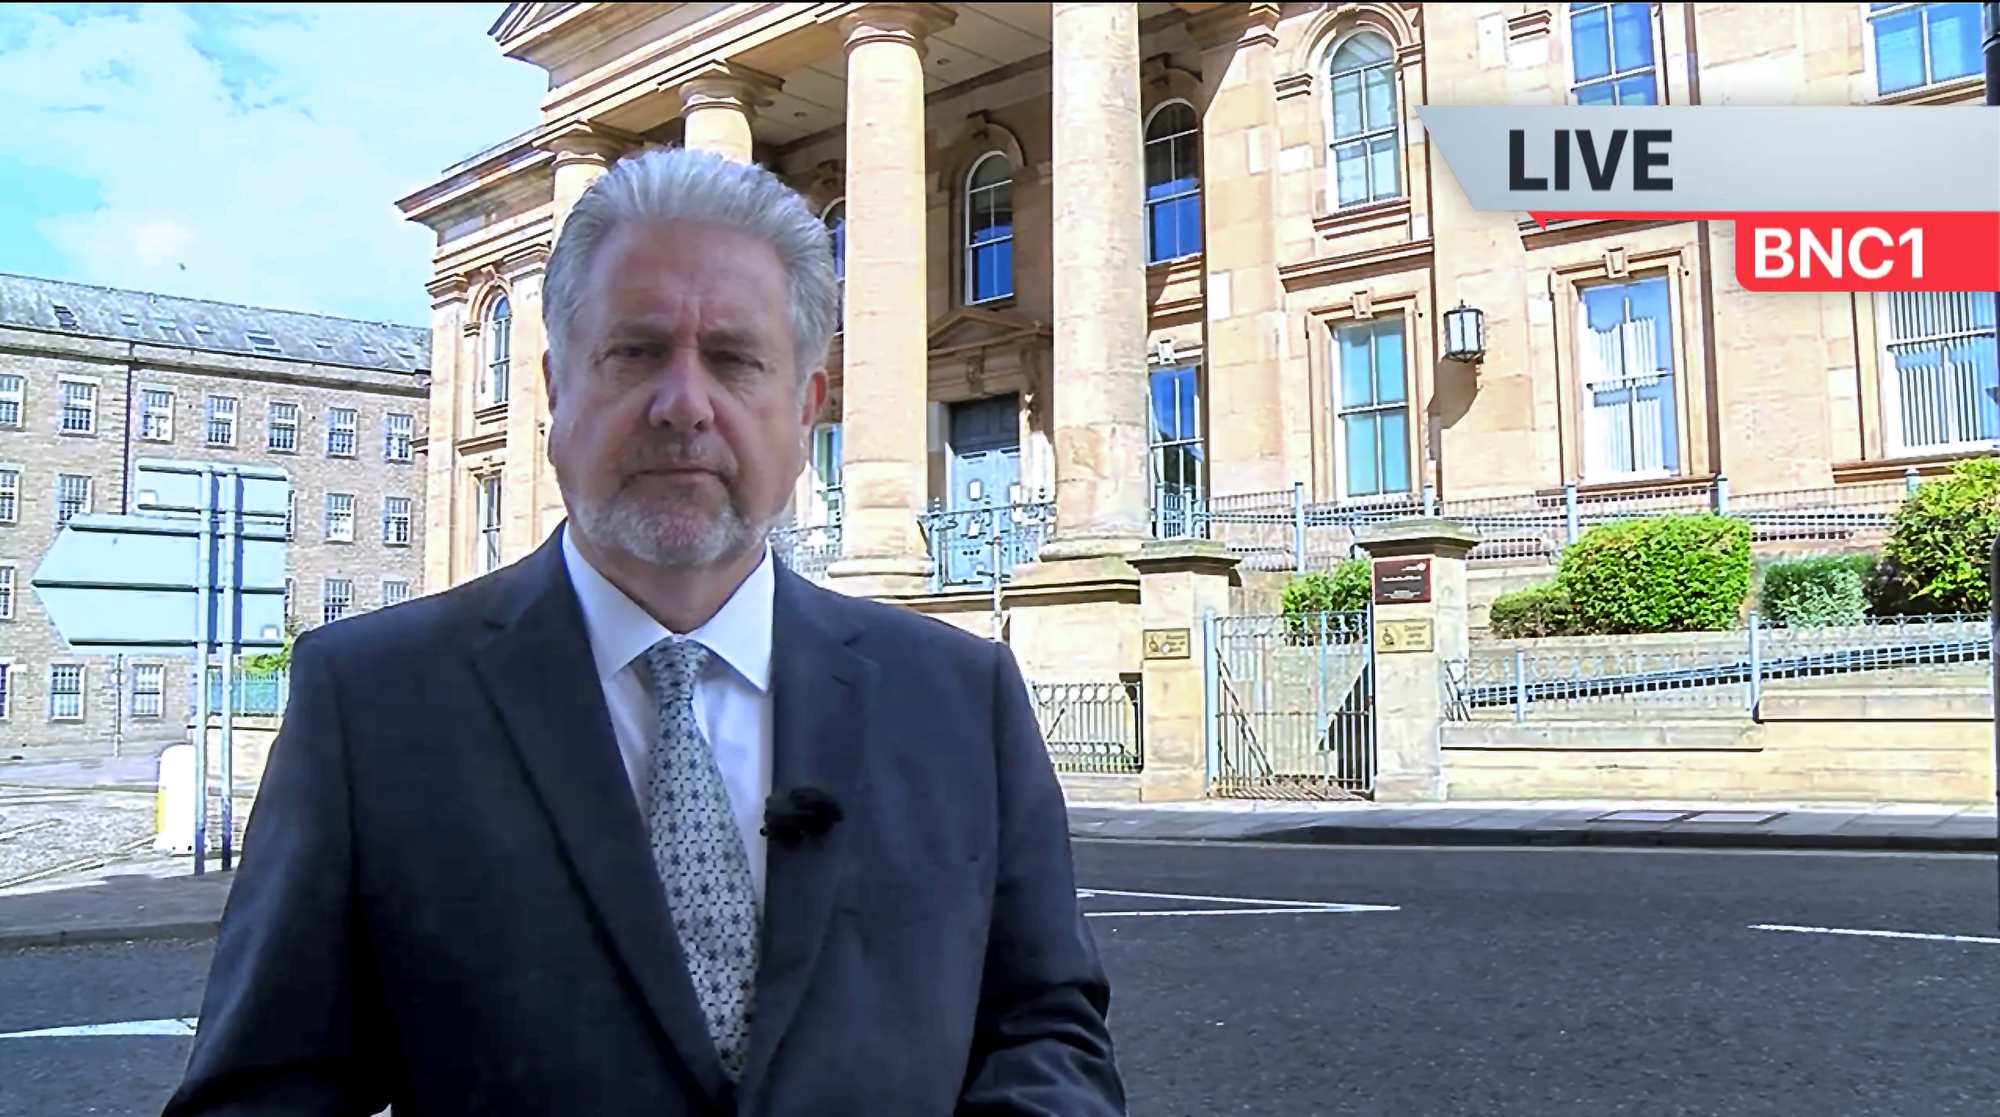 Real-life BBC reporter Andrew Anderson presents a news report from digital theatre show The Evidence Chamber outside Dundee Court. Andrew is a white man with neat white hair and beard; he stands in front of an impressive building with four pillars.